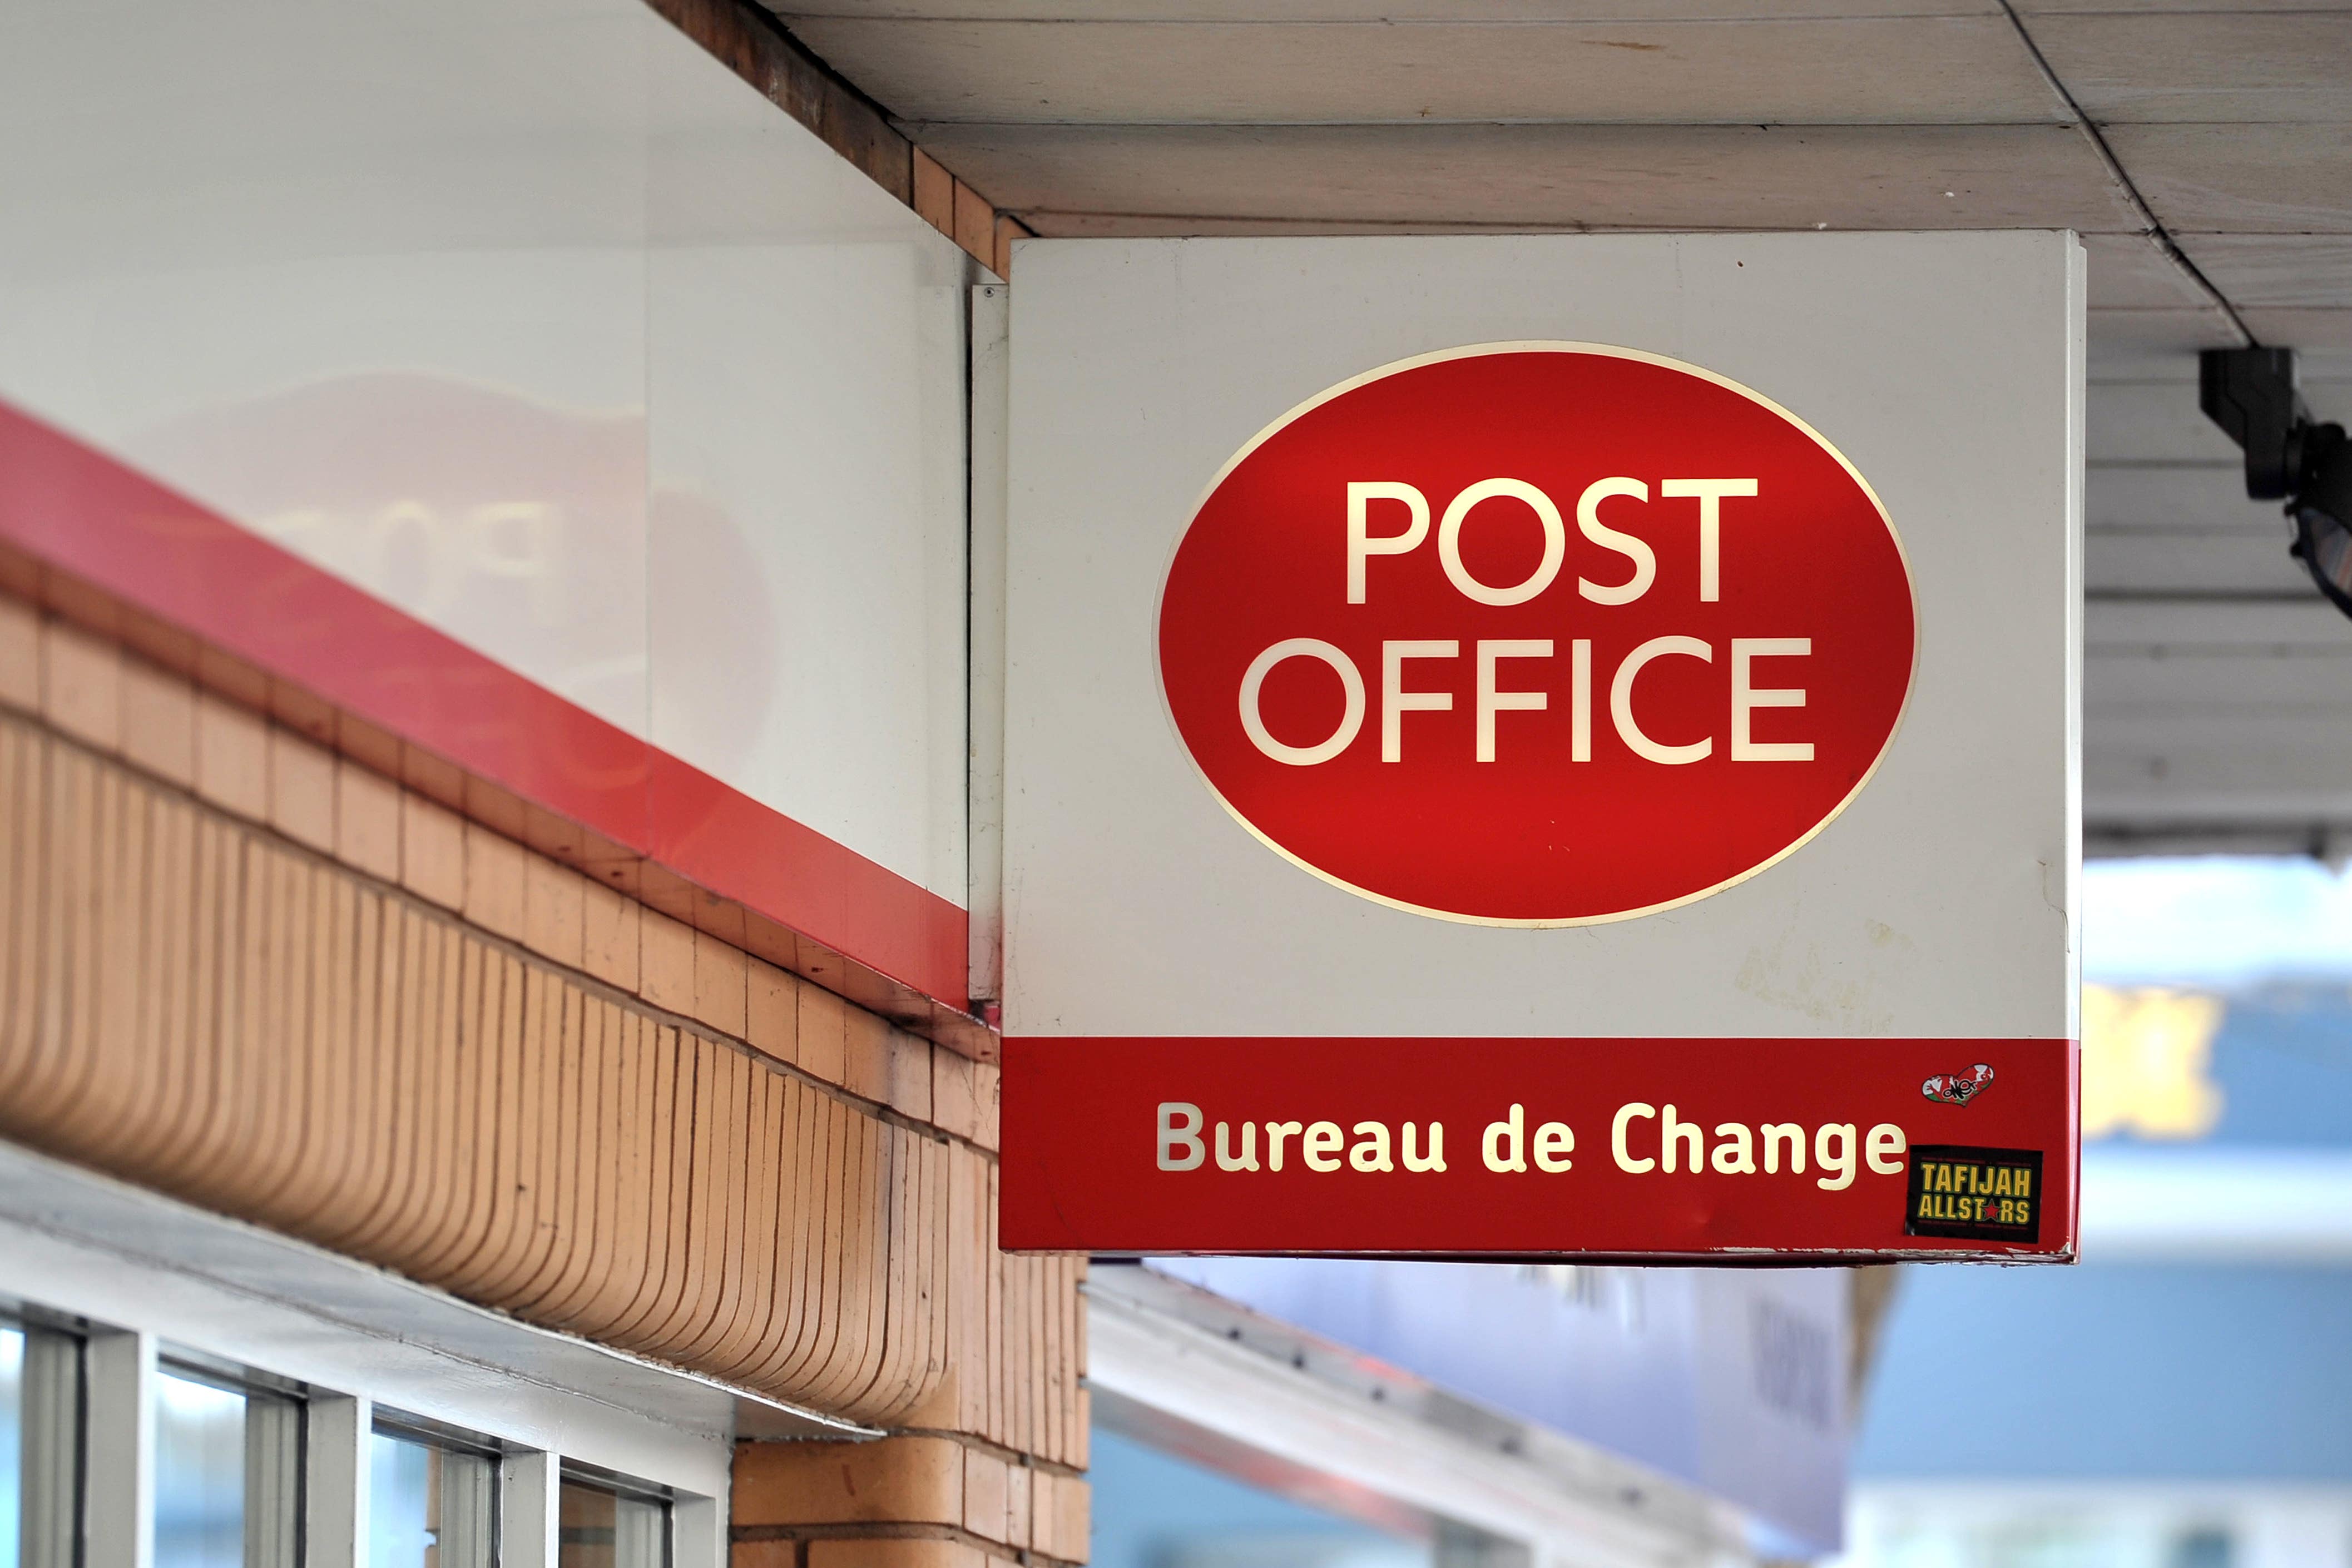 Post Office prosecutors tasked with investigating sub-postmasters in the notorious Horizon scandal used a racial slur to classify black workers, according to documents obtained by campaigners (Tim Ireland/PA)